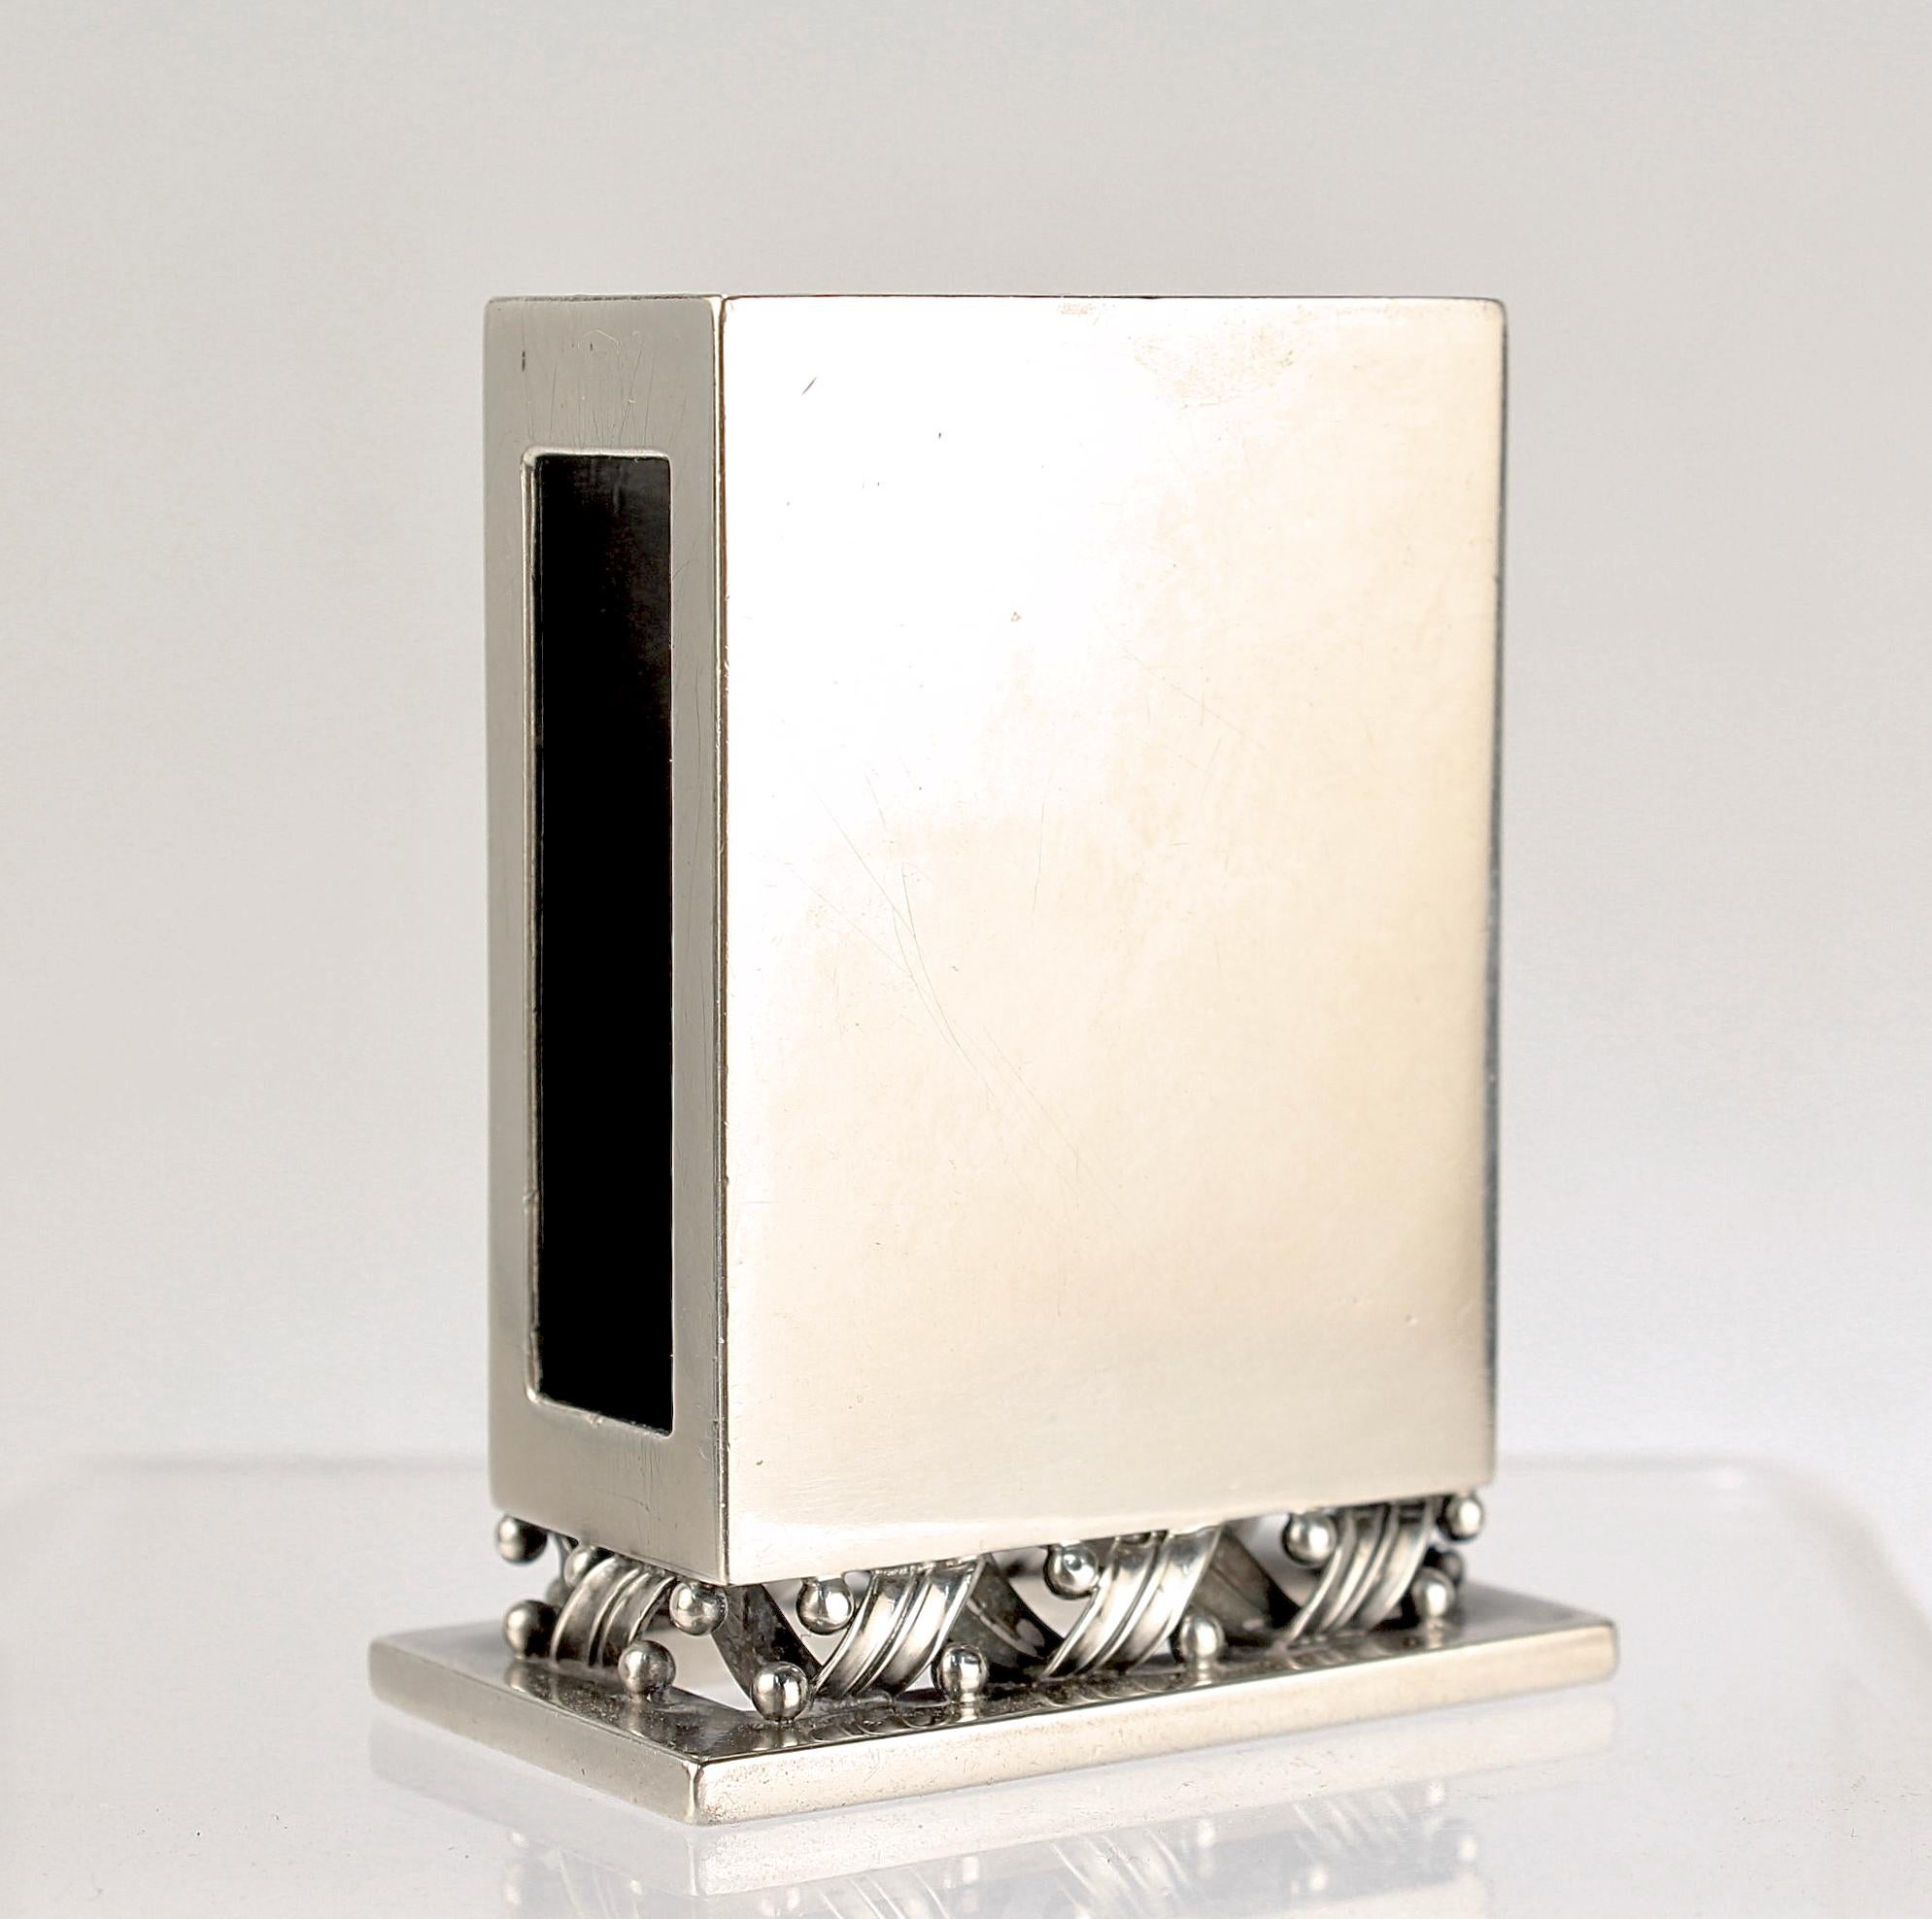 A fine sterling silver match holder.

Designed by Harald Nielsen for Georg Jensen.

Model no. 639.

Simply a wonderful piece of Georg Jensen silver!

Date:
Early 20th Century

Overall Condition:
It is in overall fair, as-pictured, used estate